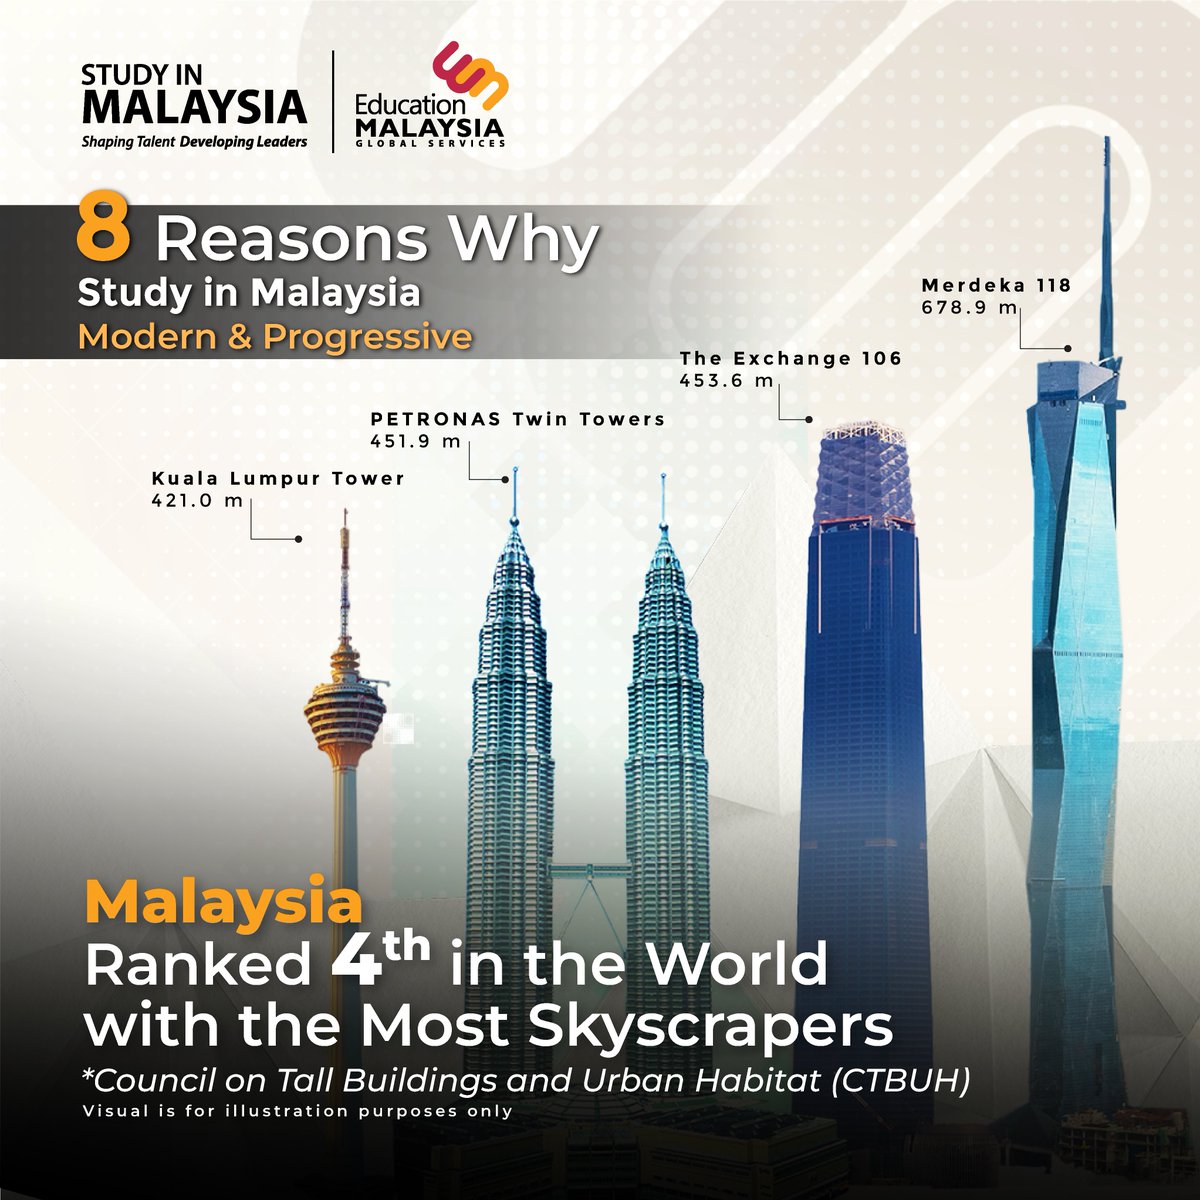 #StudyinMalaysia 🇲🇾

Malaysia Soars: Ranked 4th Worldwide with Most Skyscrapers! 🌆✨

For international students, there are a lot of magnificent buildings you can get inspired by in Malaysia. With iconic landmarks like the PETRONAS Twin Towers leading the charge, Malaysia shines